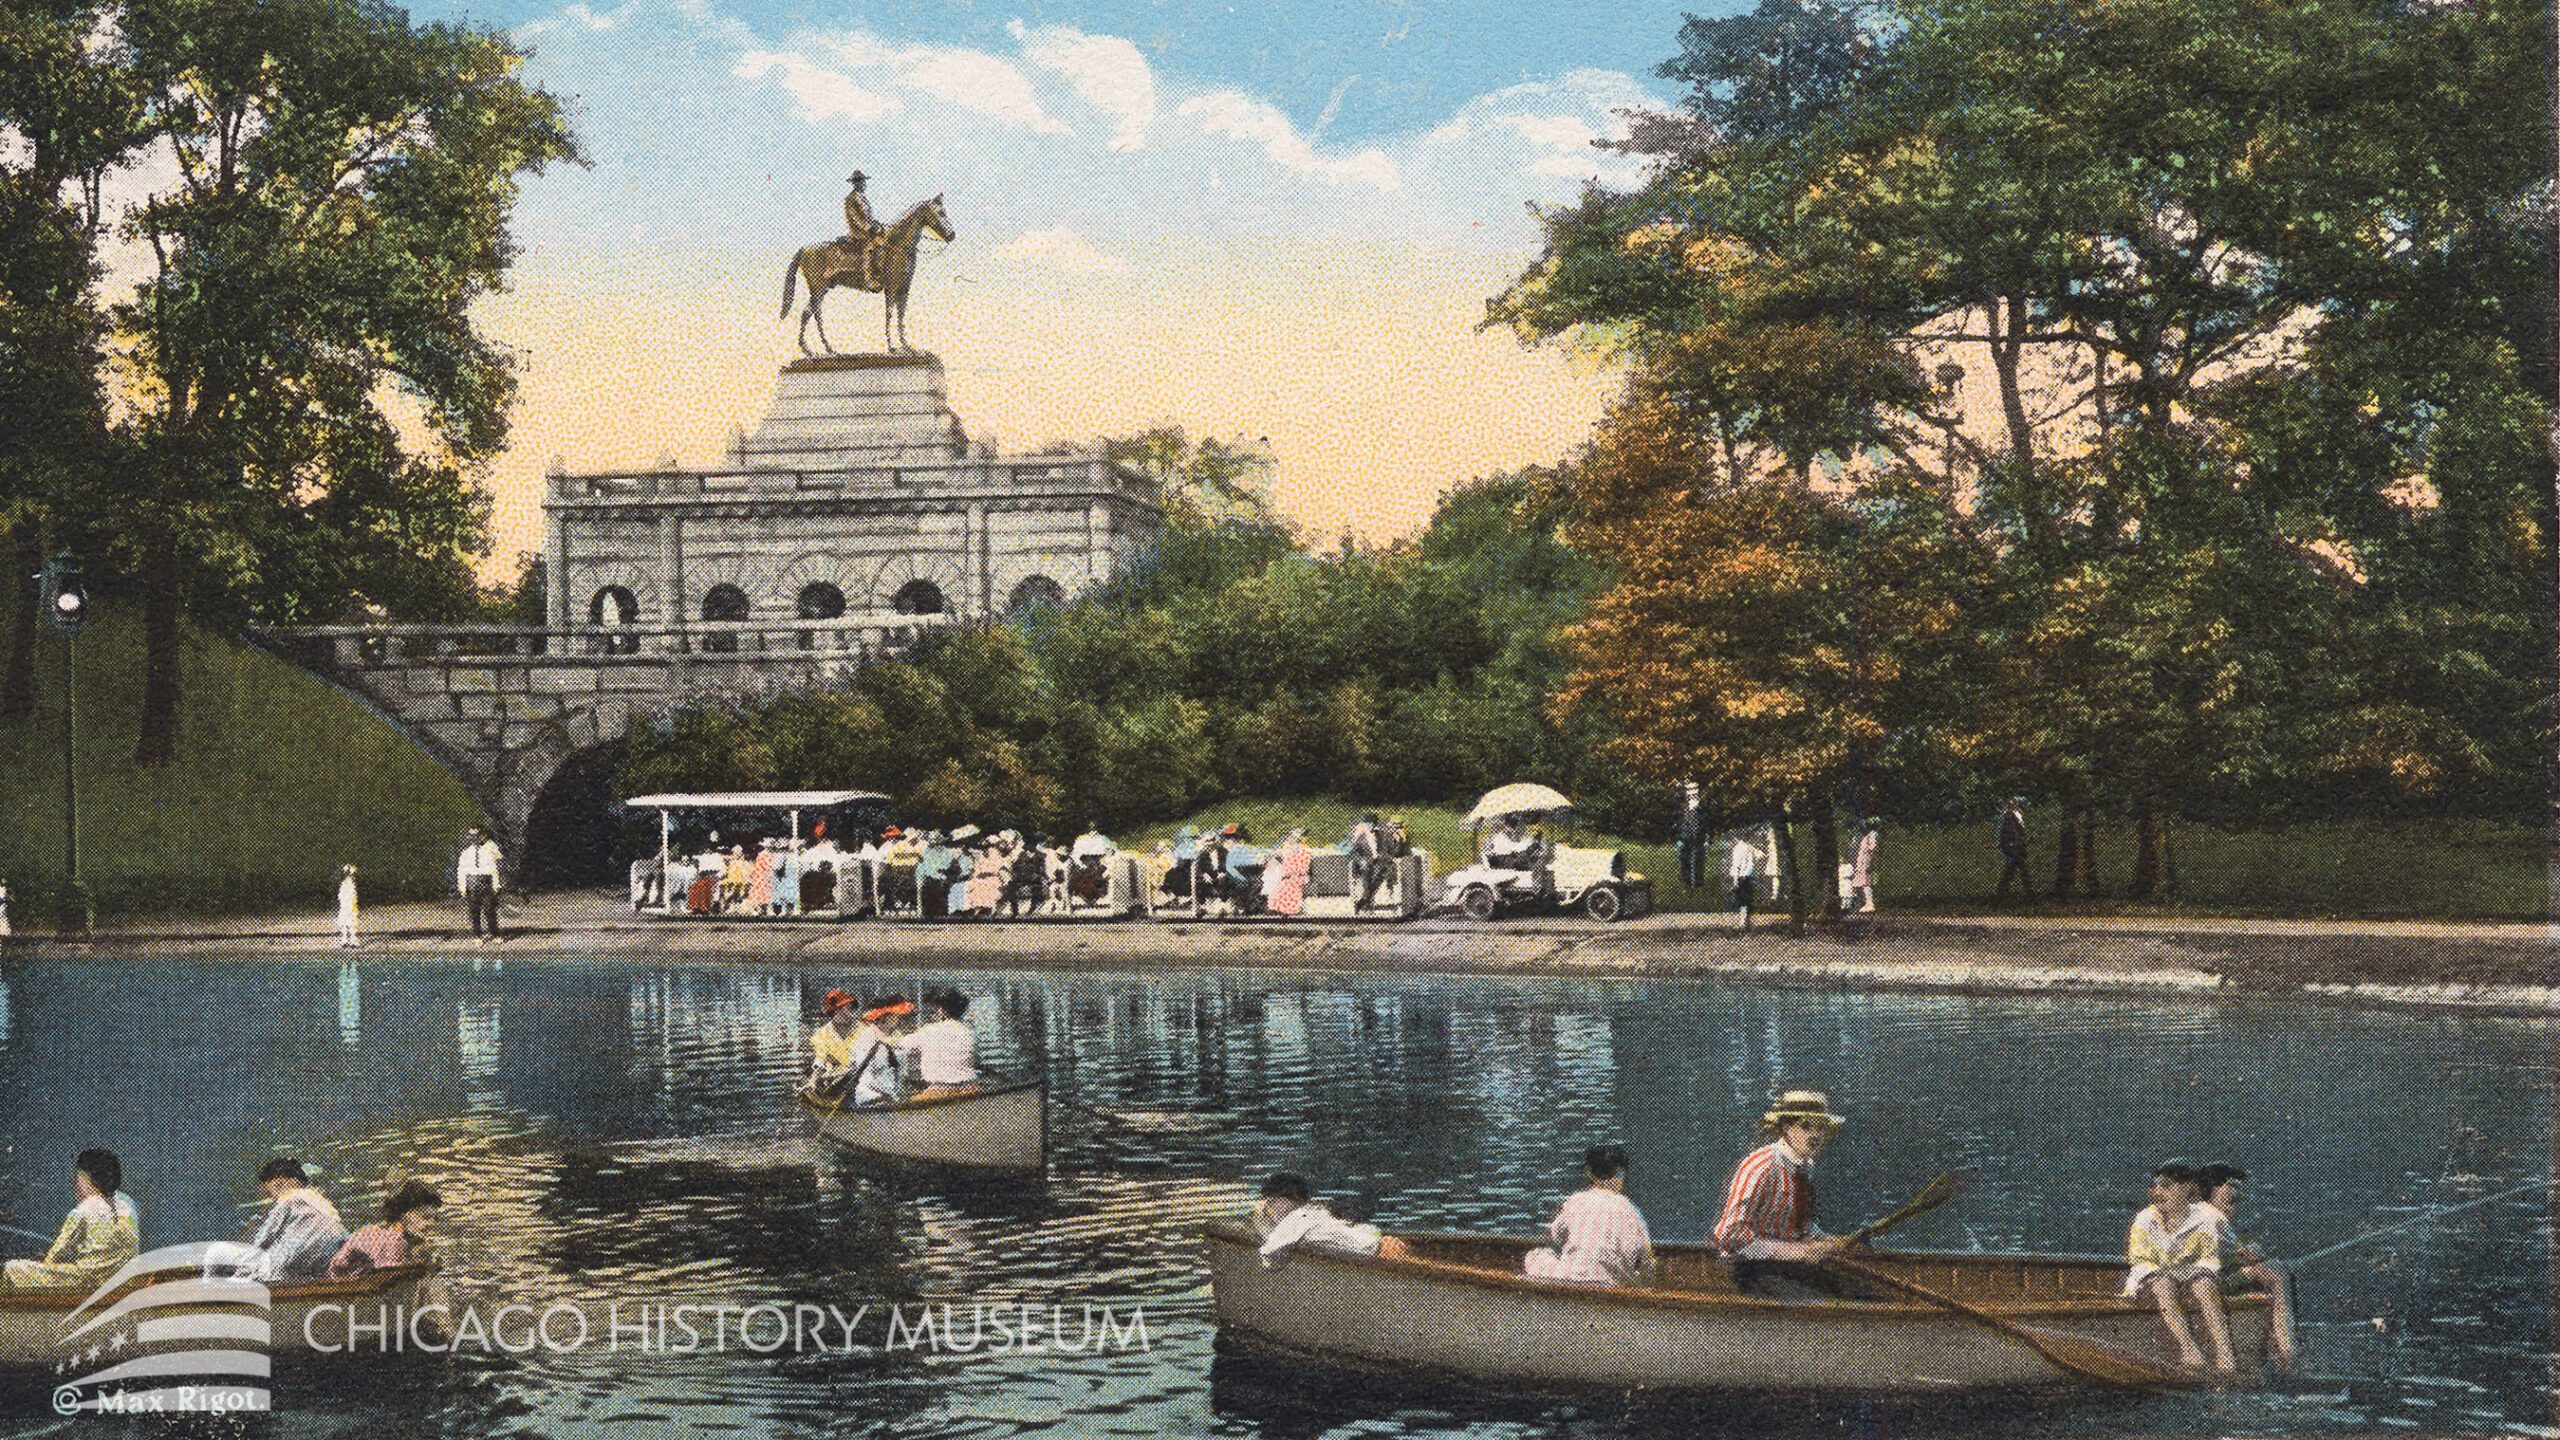 Color illustration of people in rowboats on a pond with trees and a monument in the background